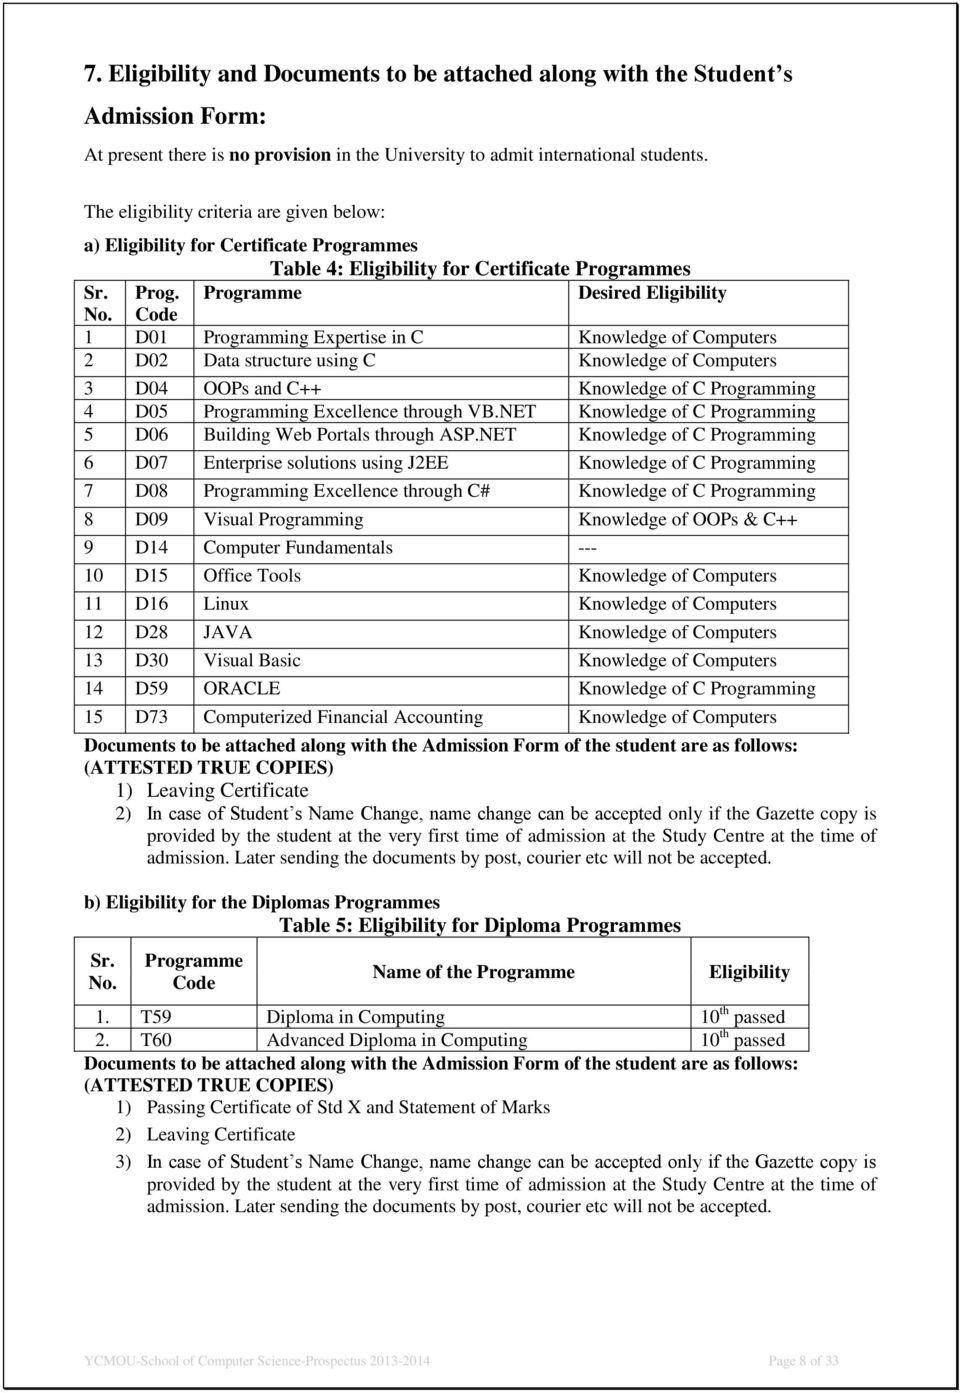 Code 1 D01 Programming Expertise in C Knowledge of Computers 2 D02 Data structure using C Knowledge of Computers 3 D04 OOPs and C++ Knowledge of C Programming 4 D05 Programming Excellence through VB.